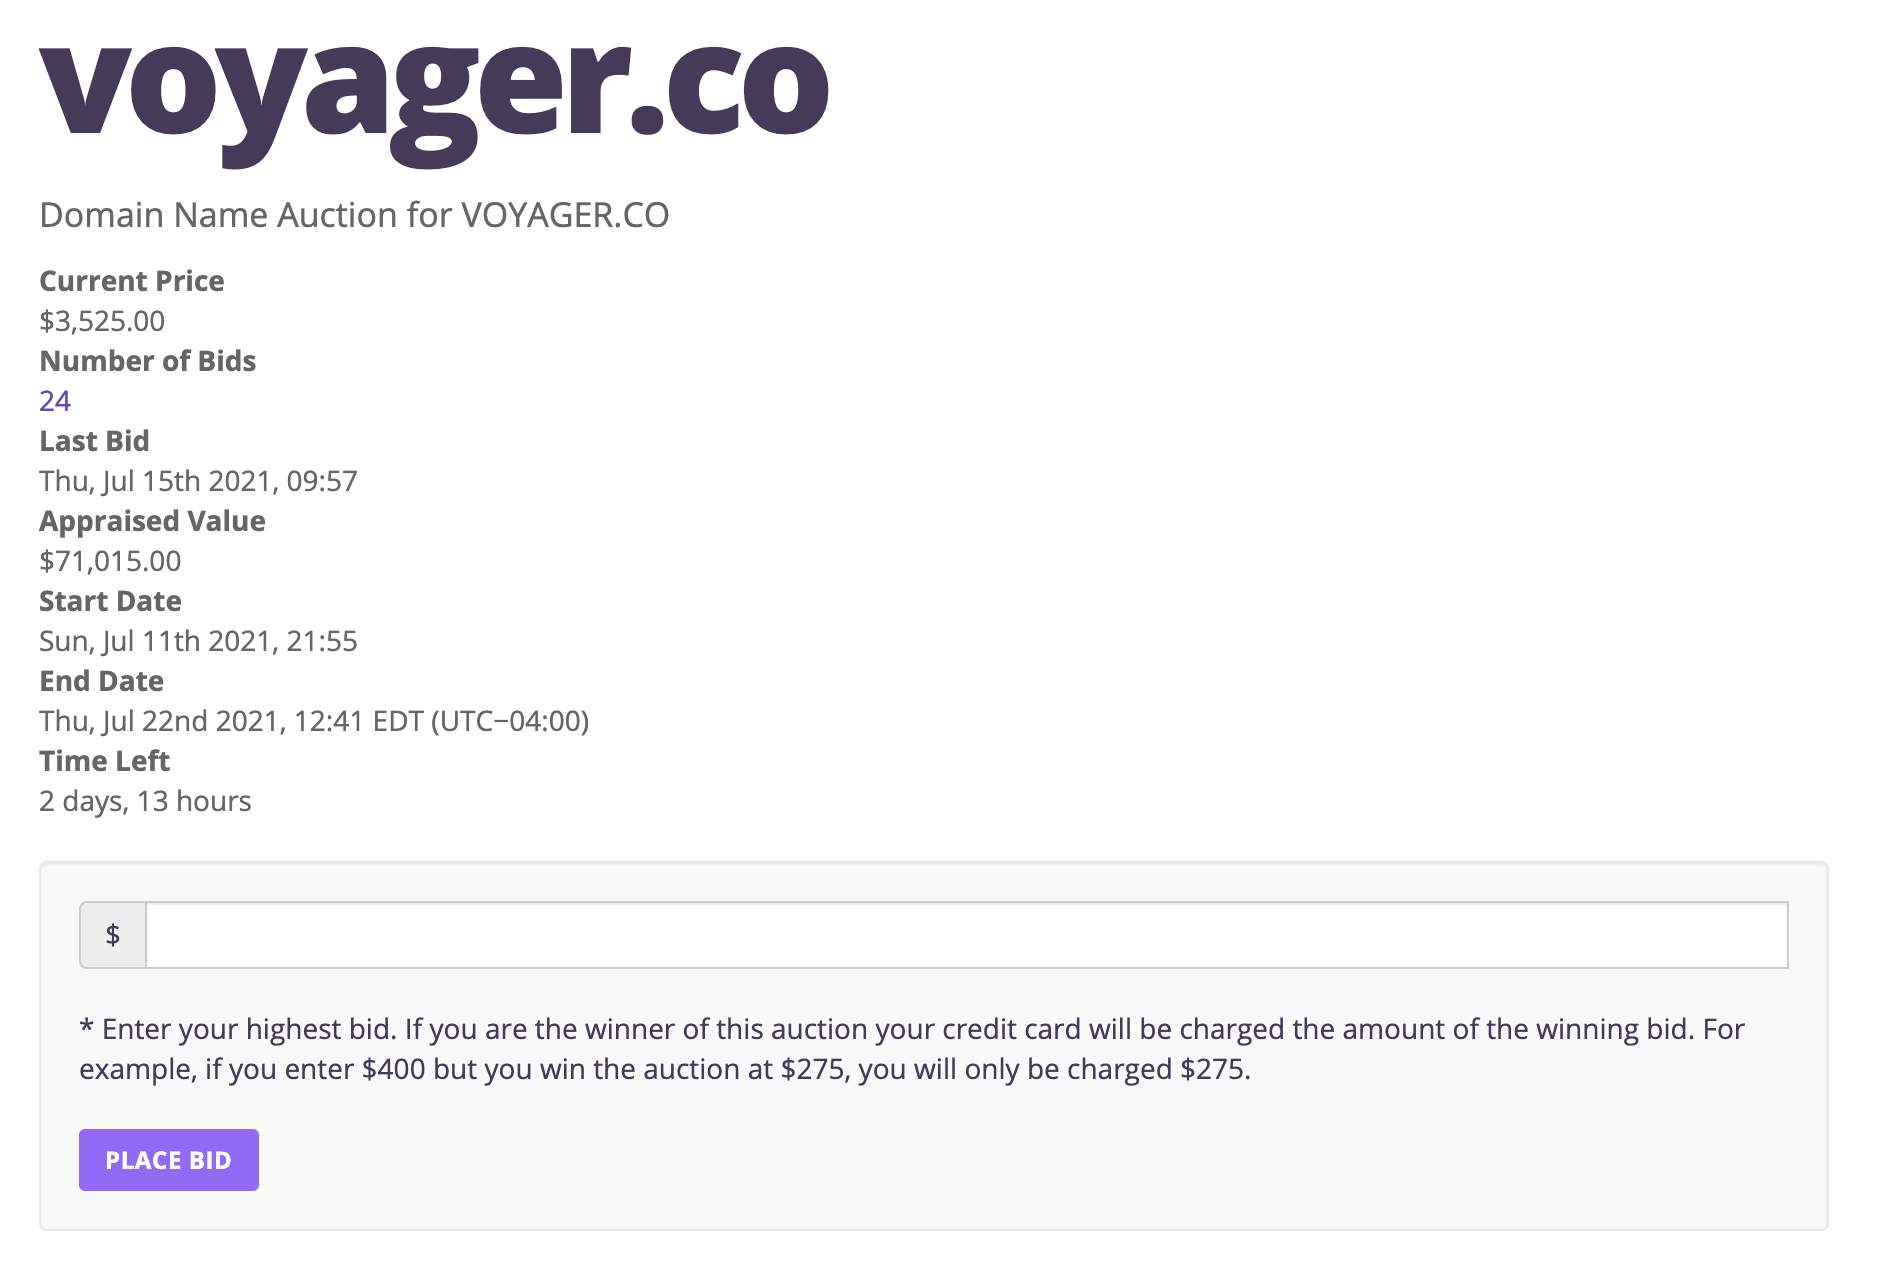 Voyager.co